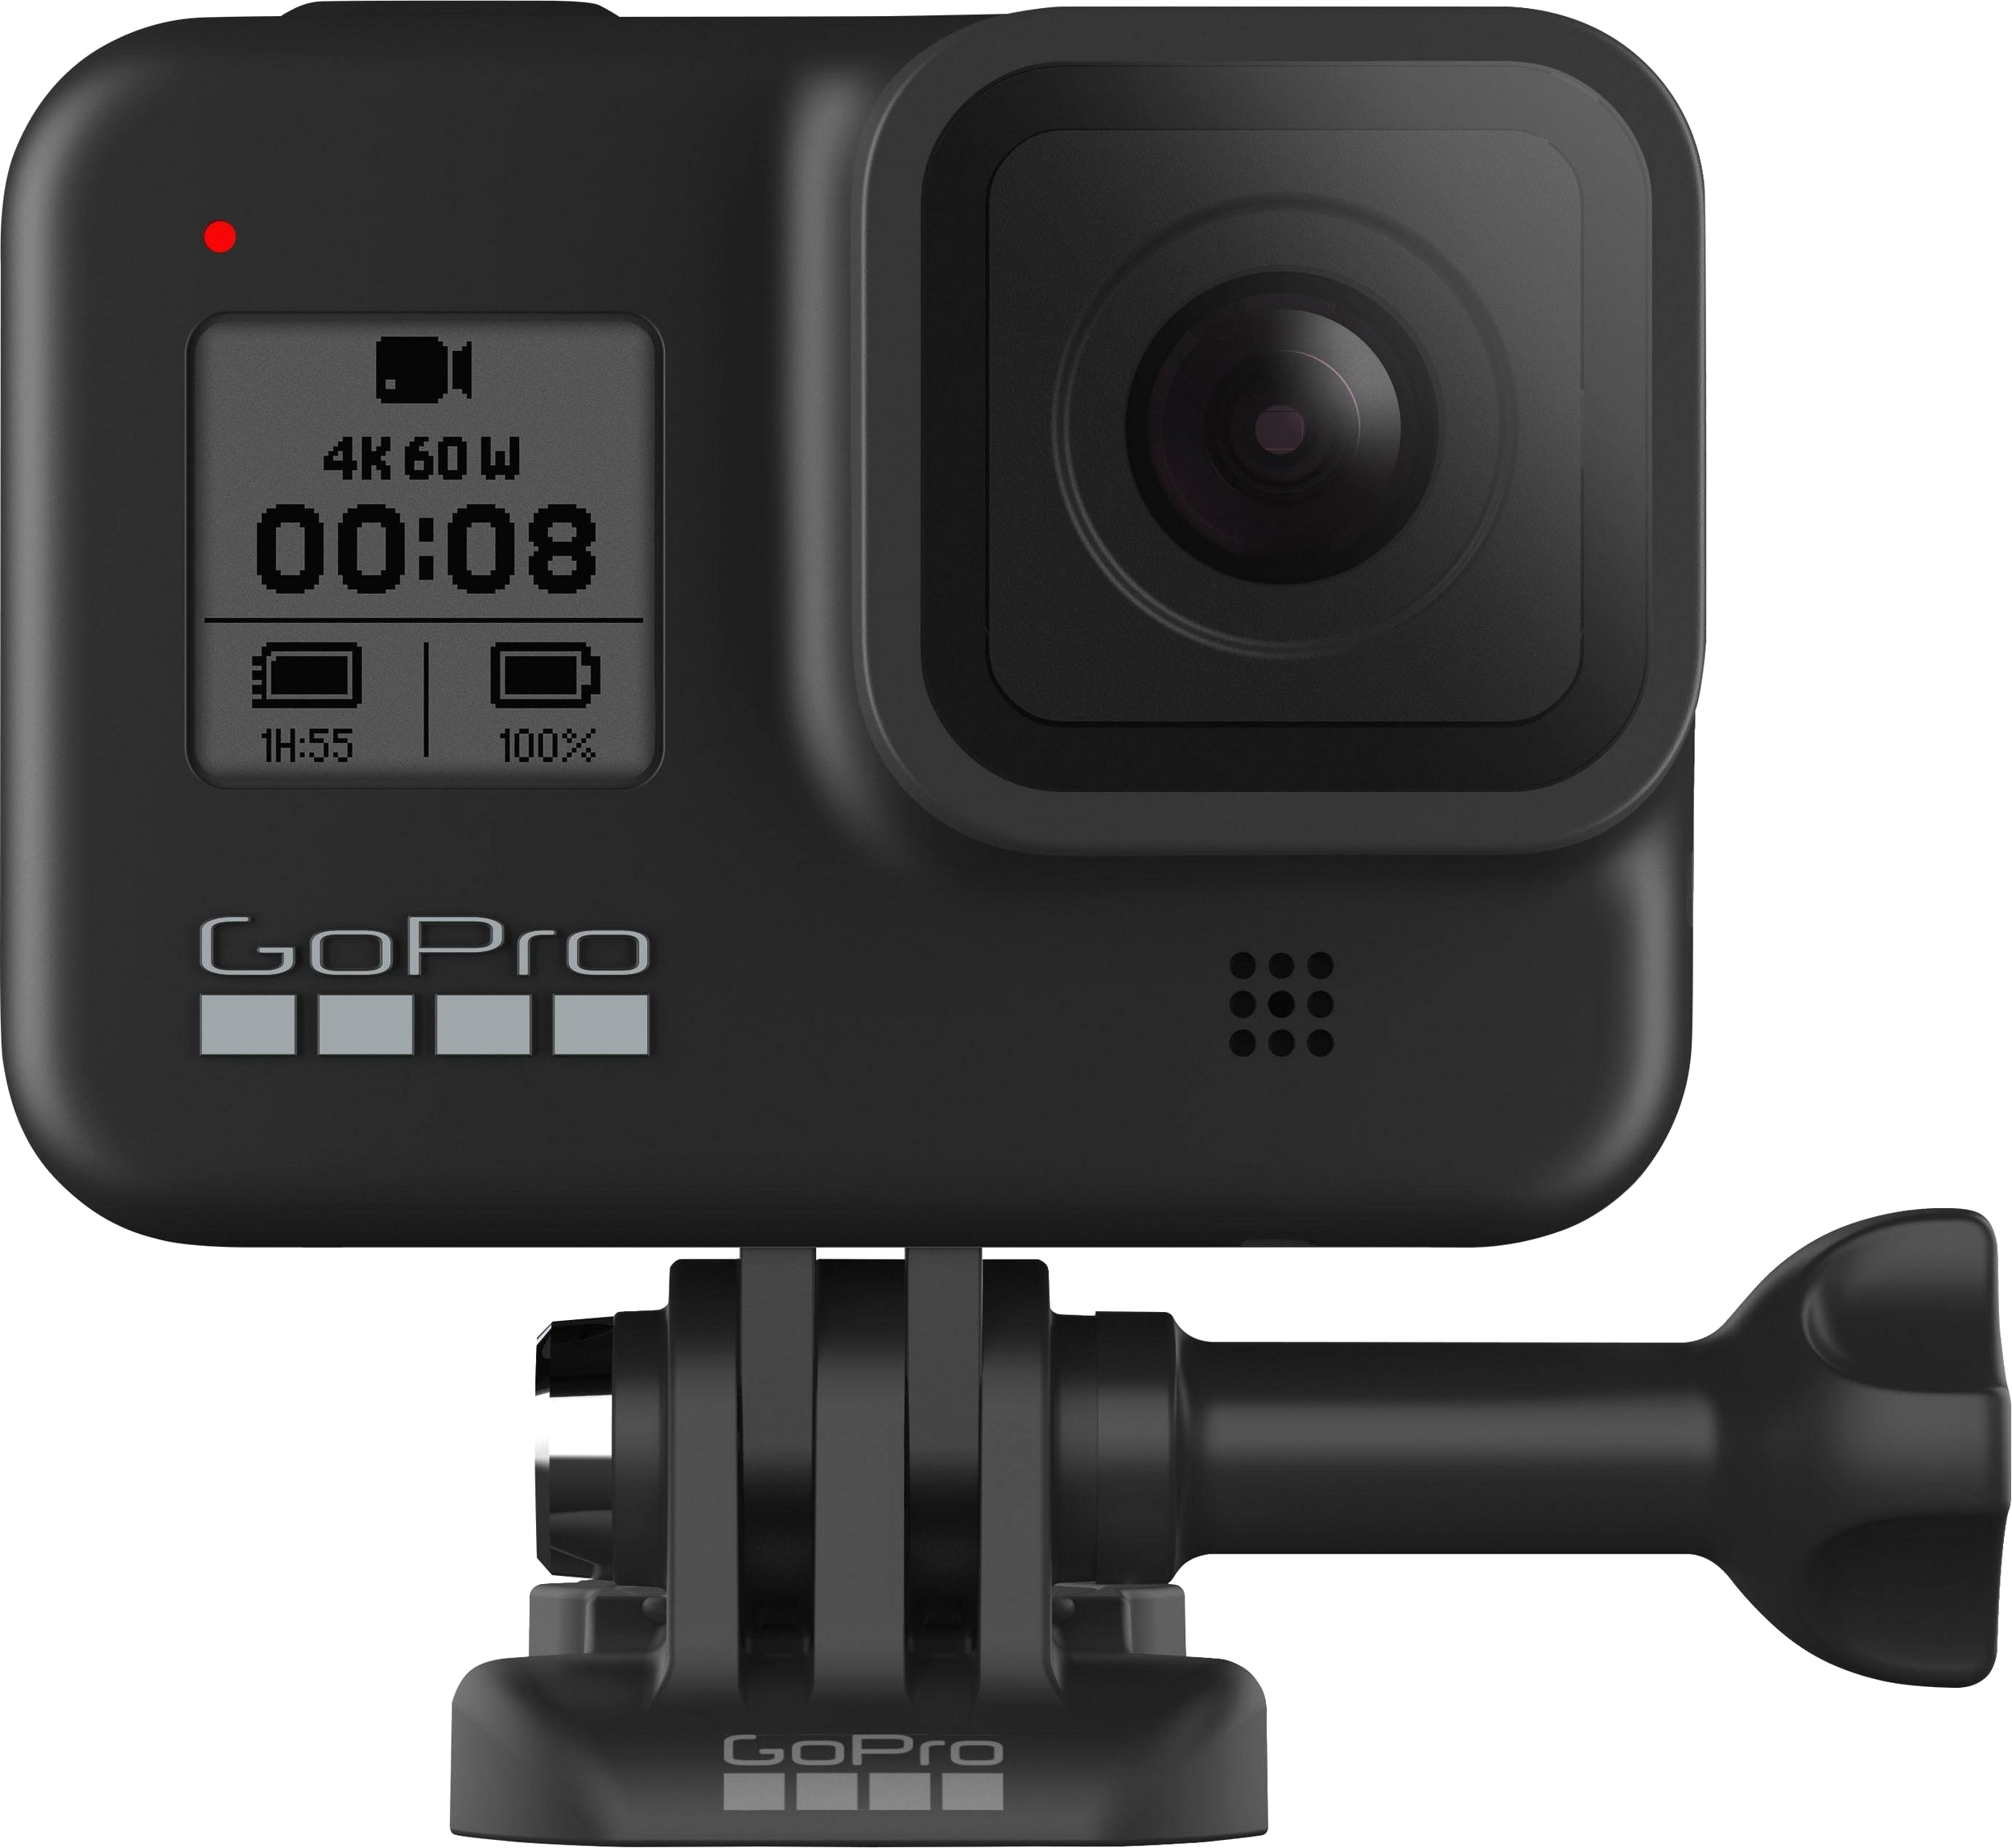 HERO8 Action per €5.90 month Rent Camera from GoPro